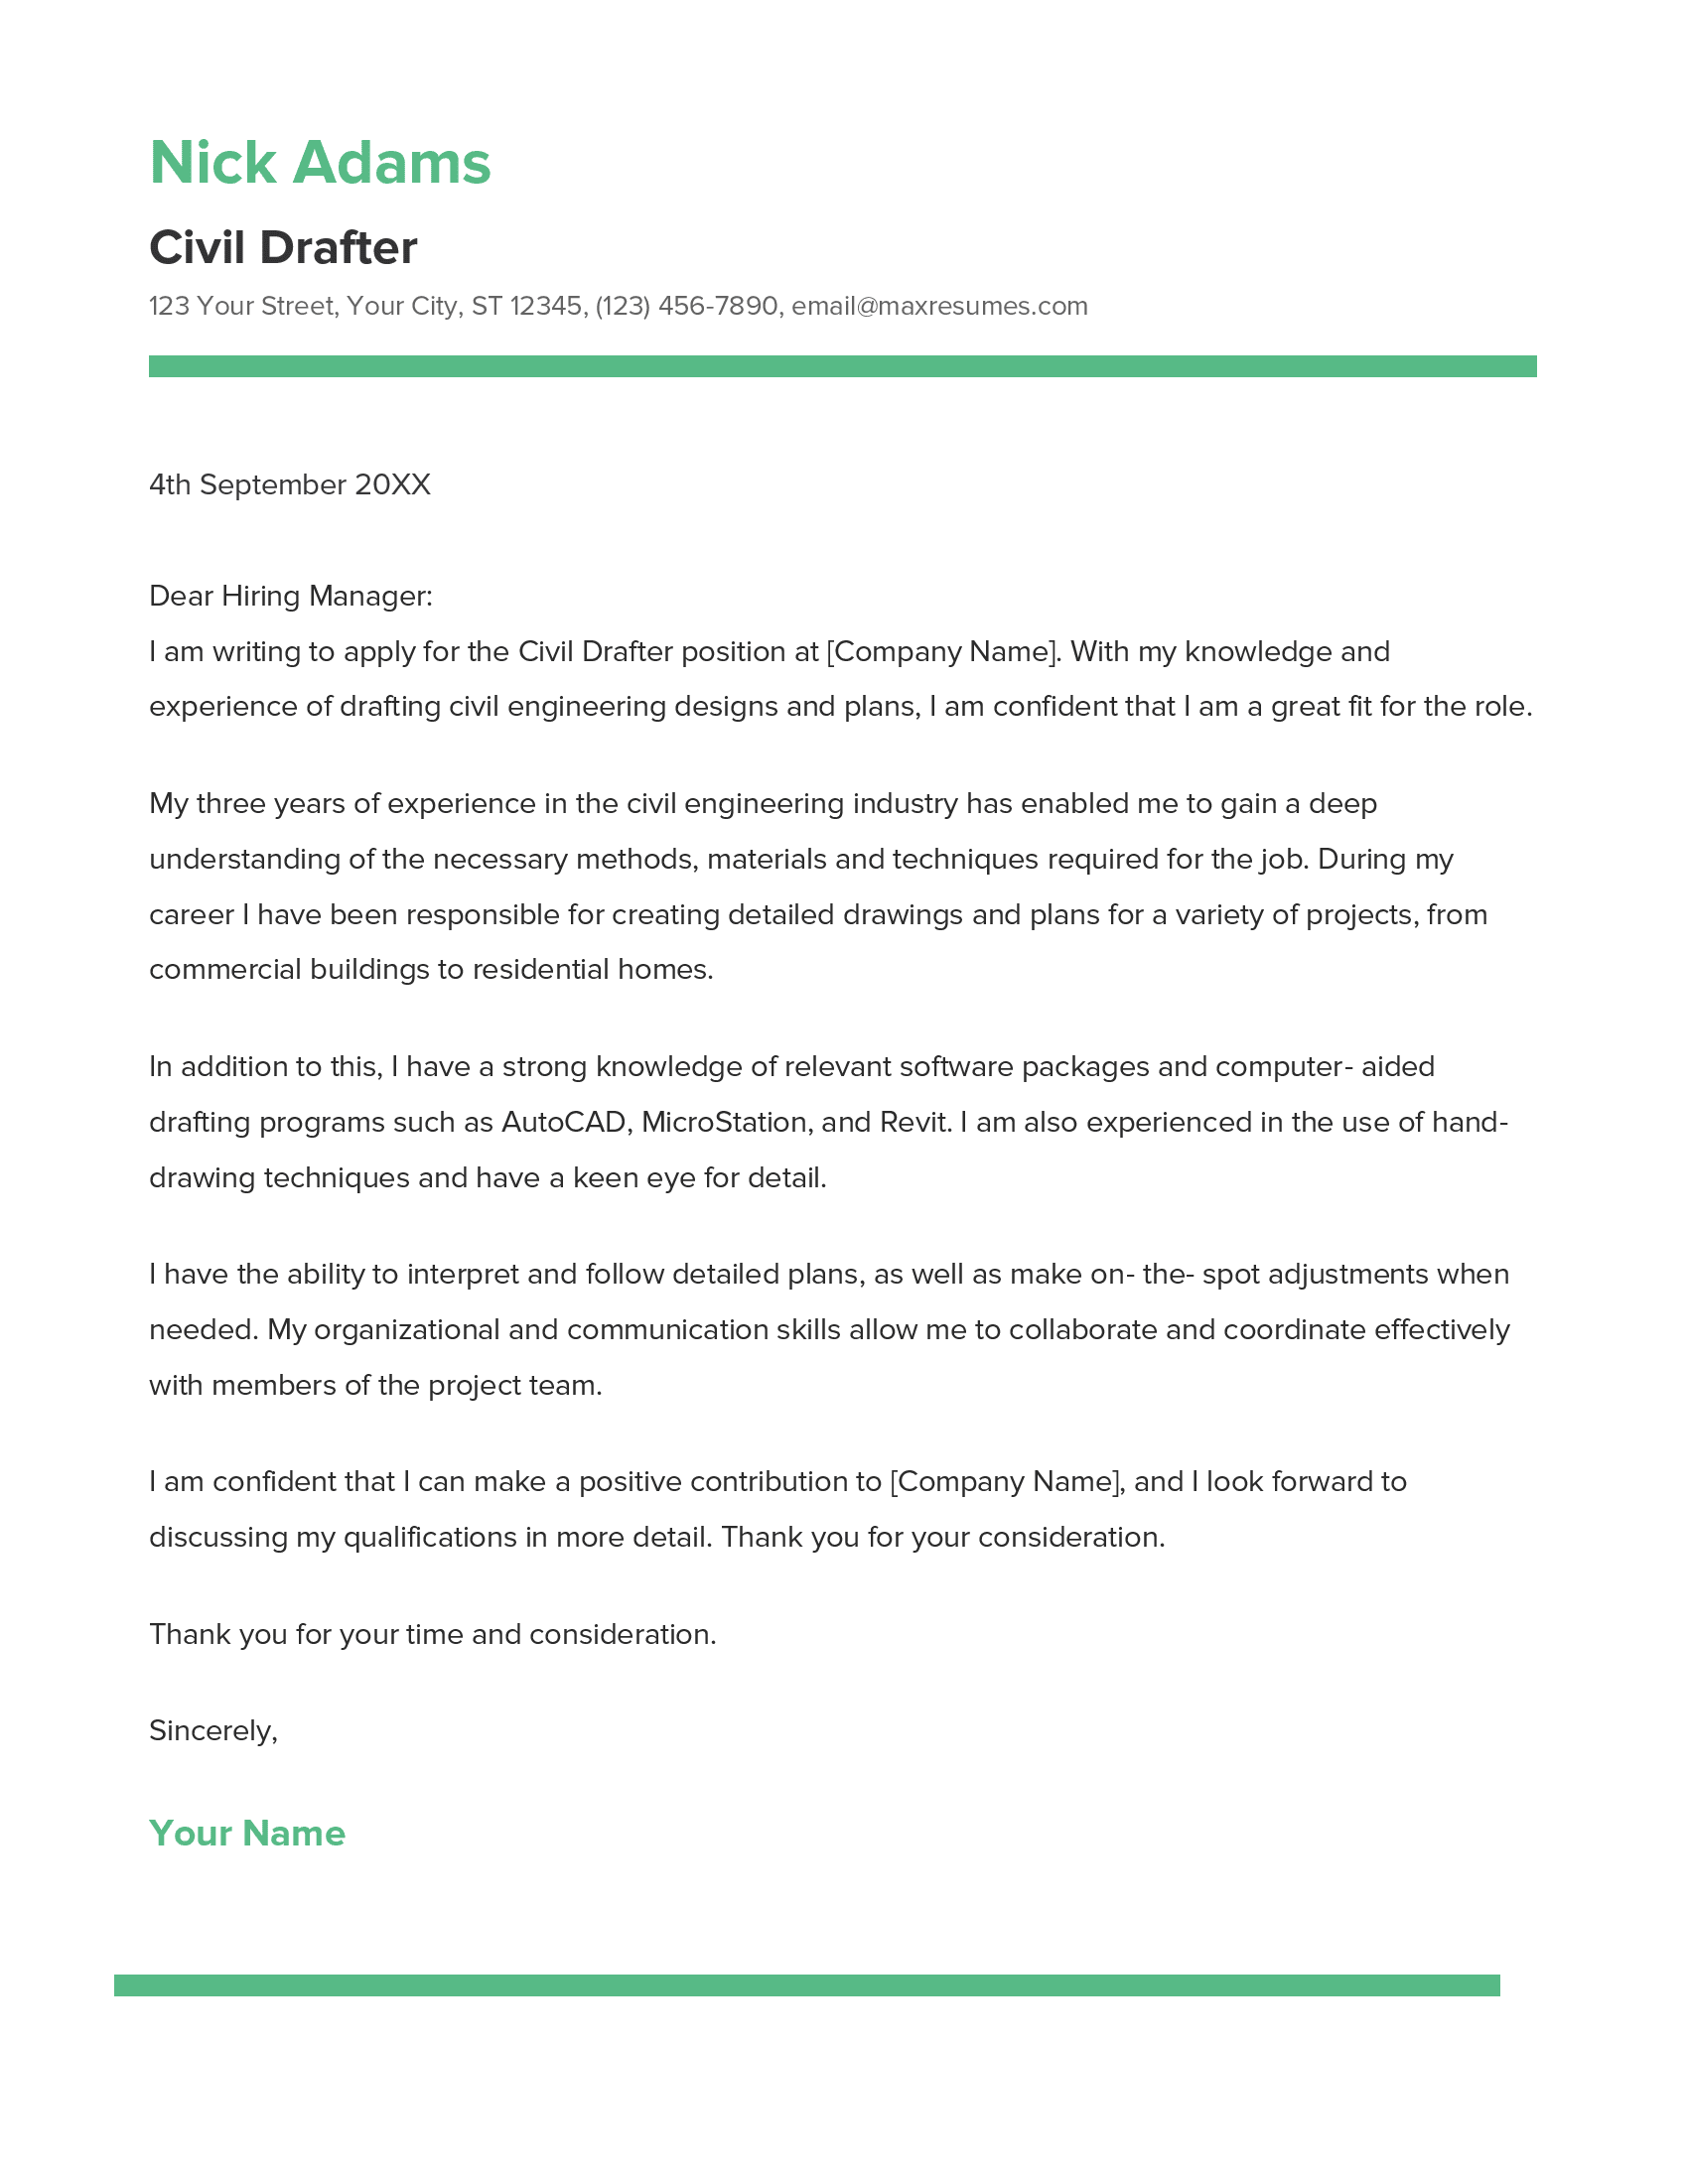 Civil Drafter Cover Letter Example